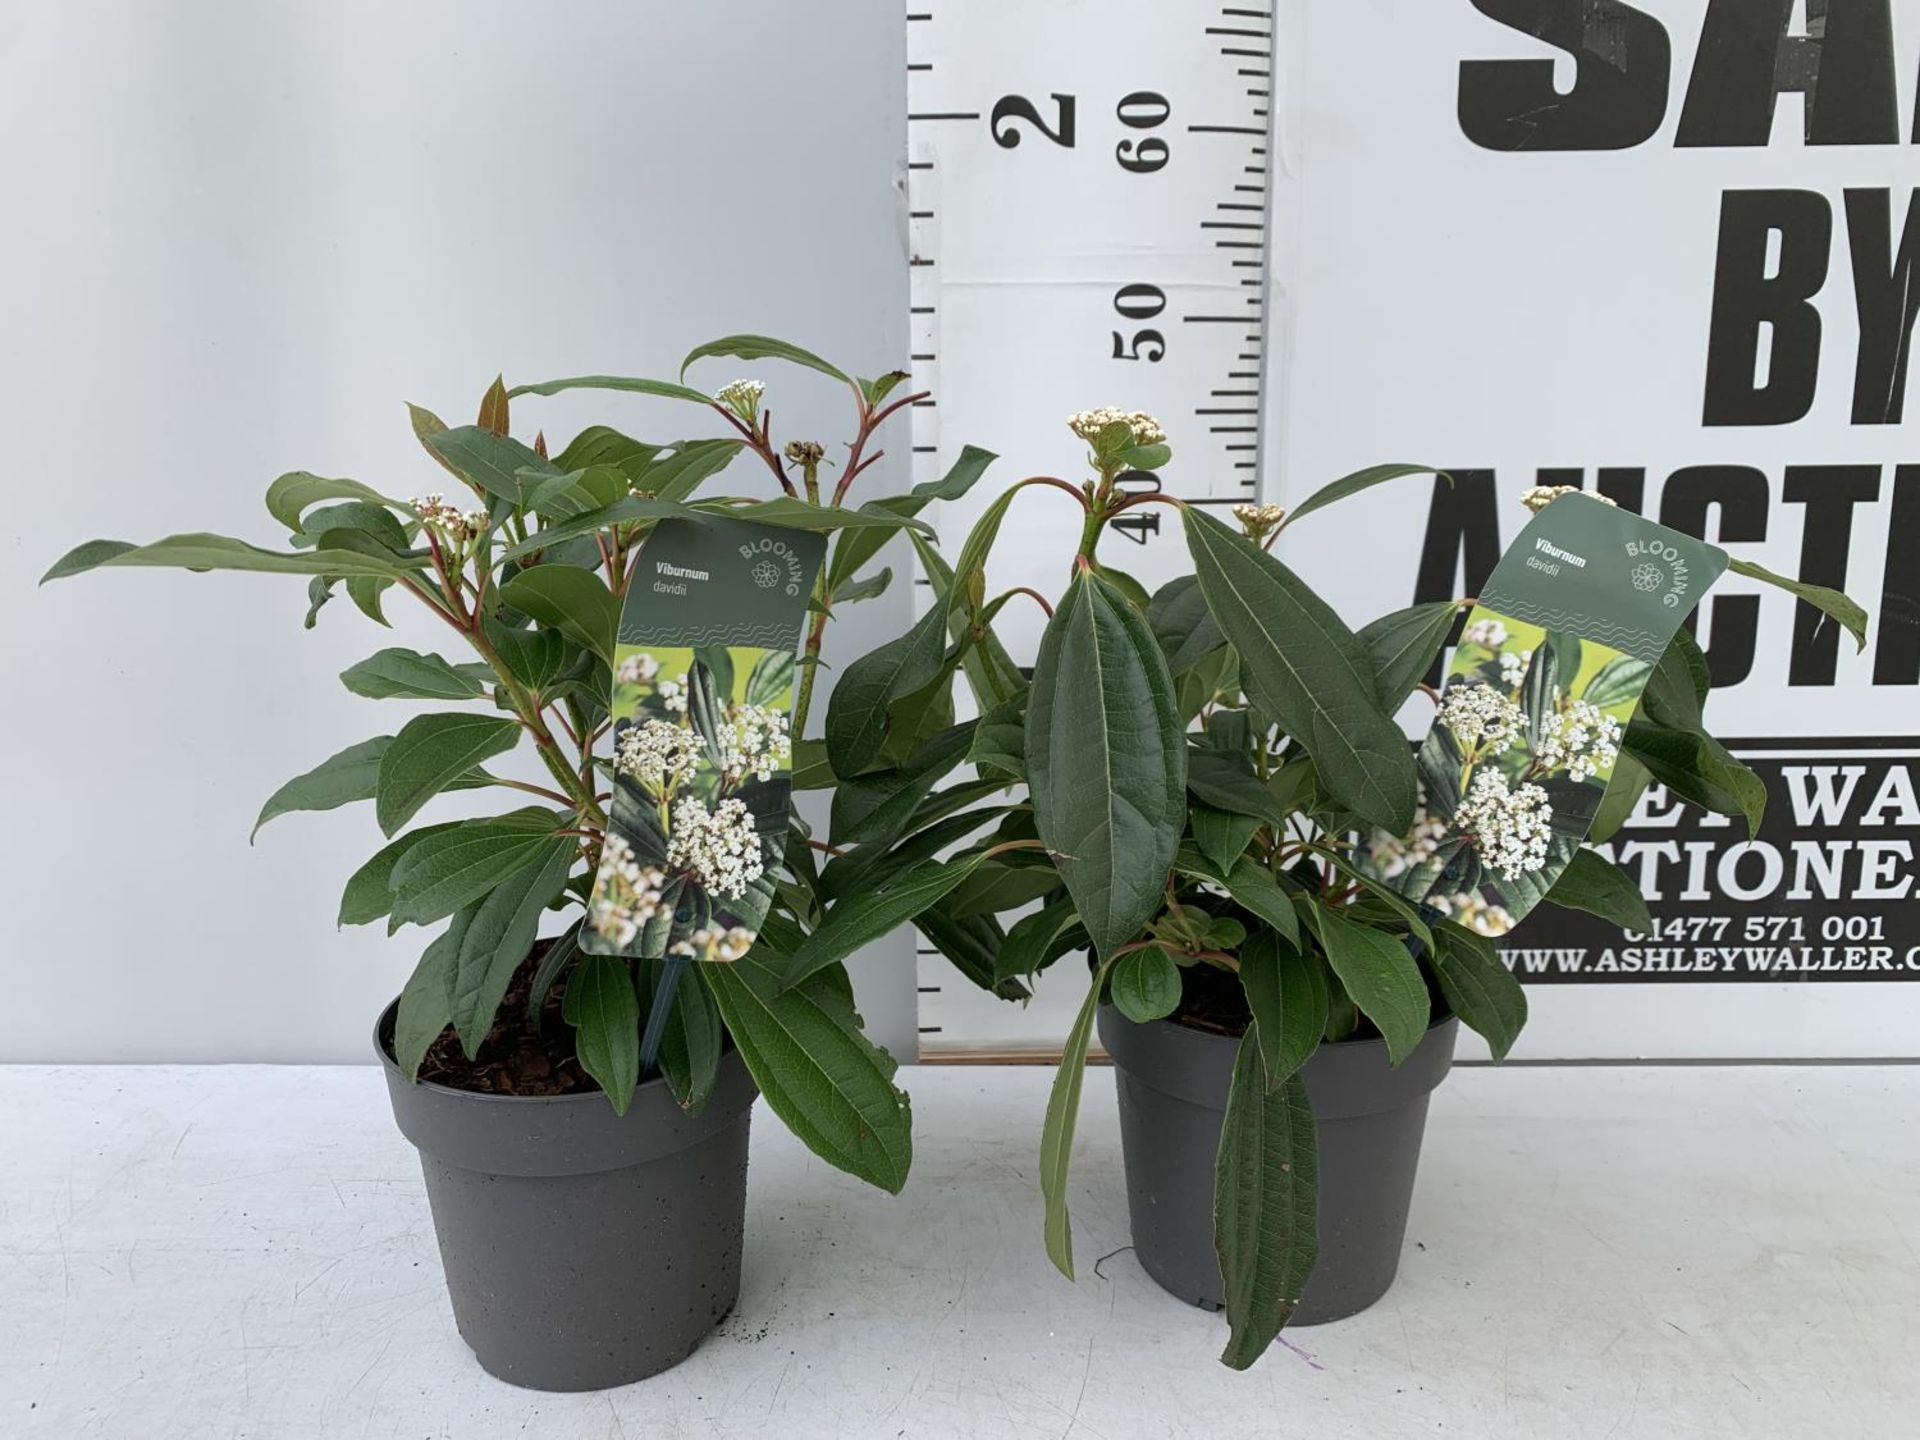 TWO VIBURNUM 'DAVIDII' IN 2 LTR POTS APPROX 45CM IN HEIGHT TO BE SOLD FOR THE TWO PLUS VAT